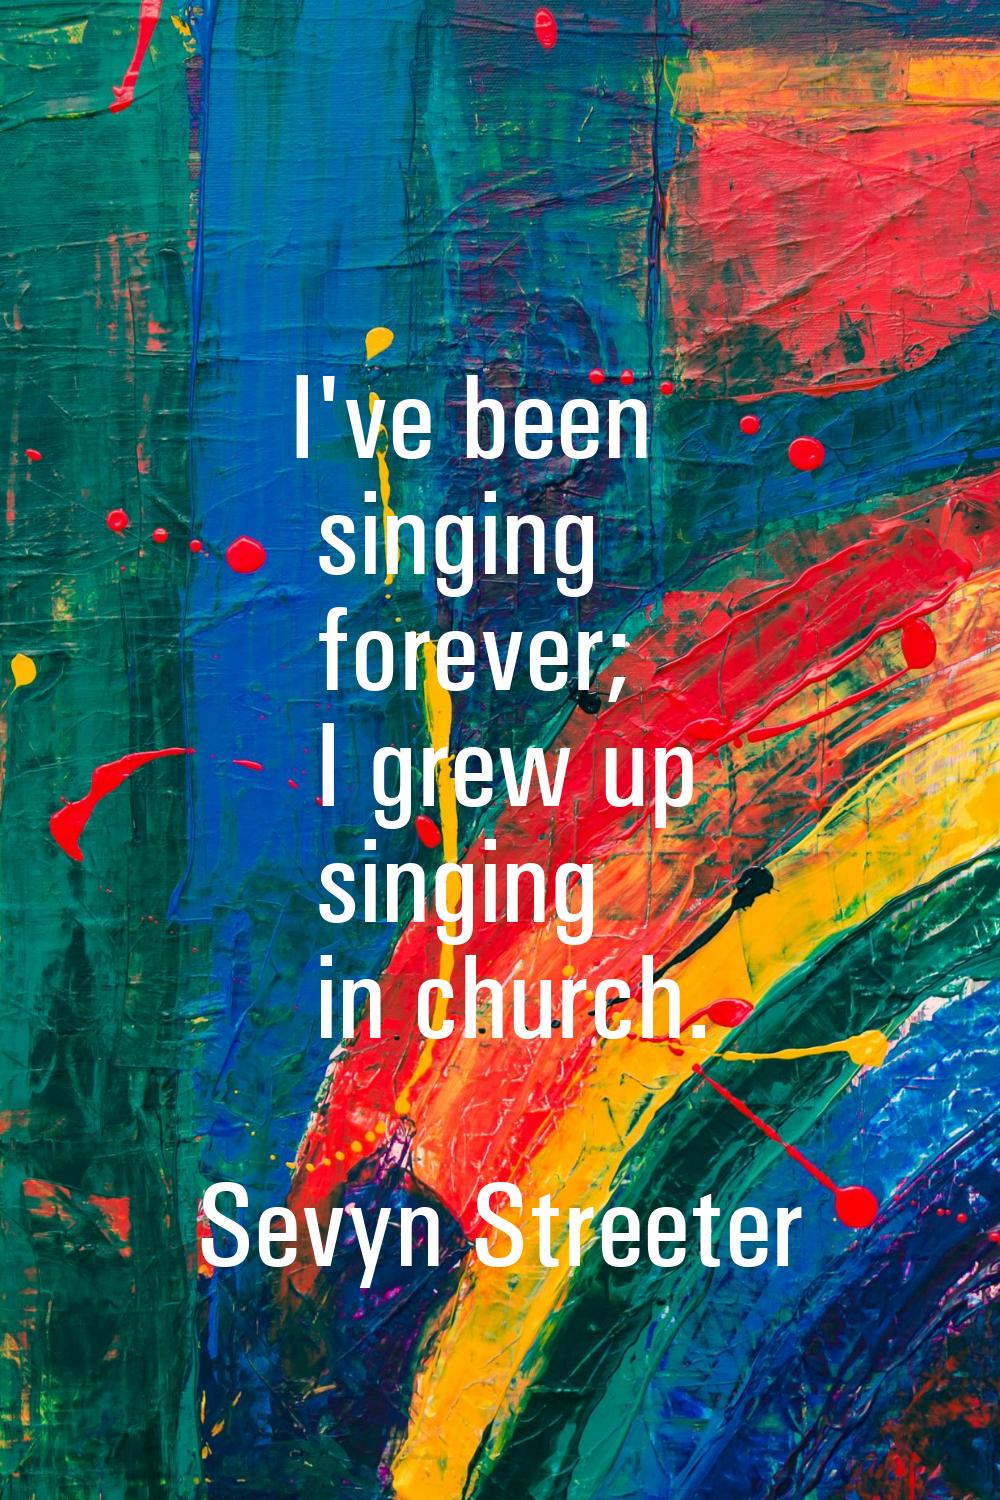 I've been singing forever; I grew up singing in church.